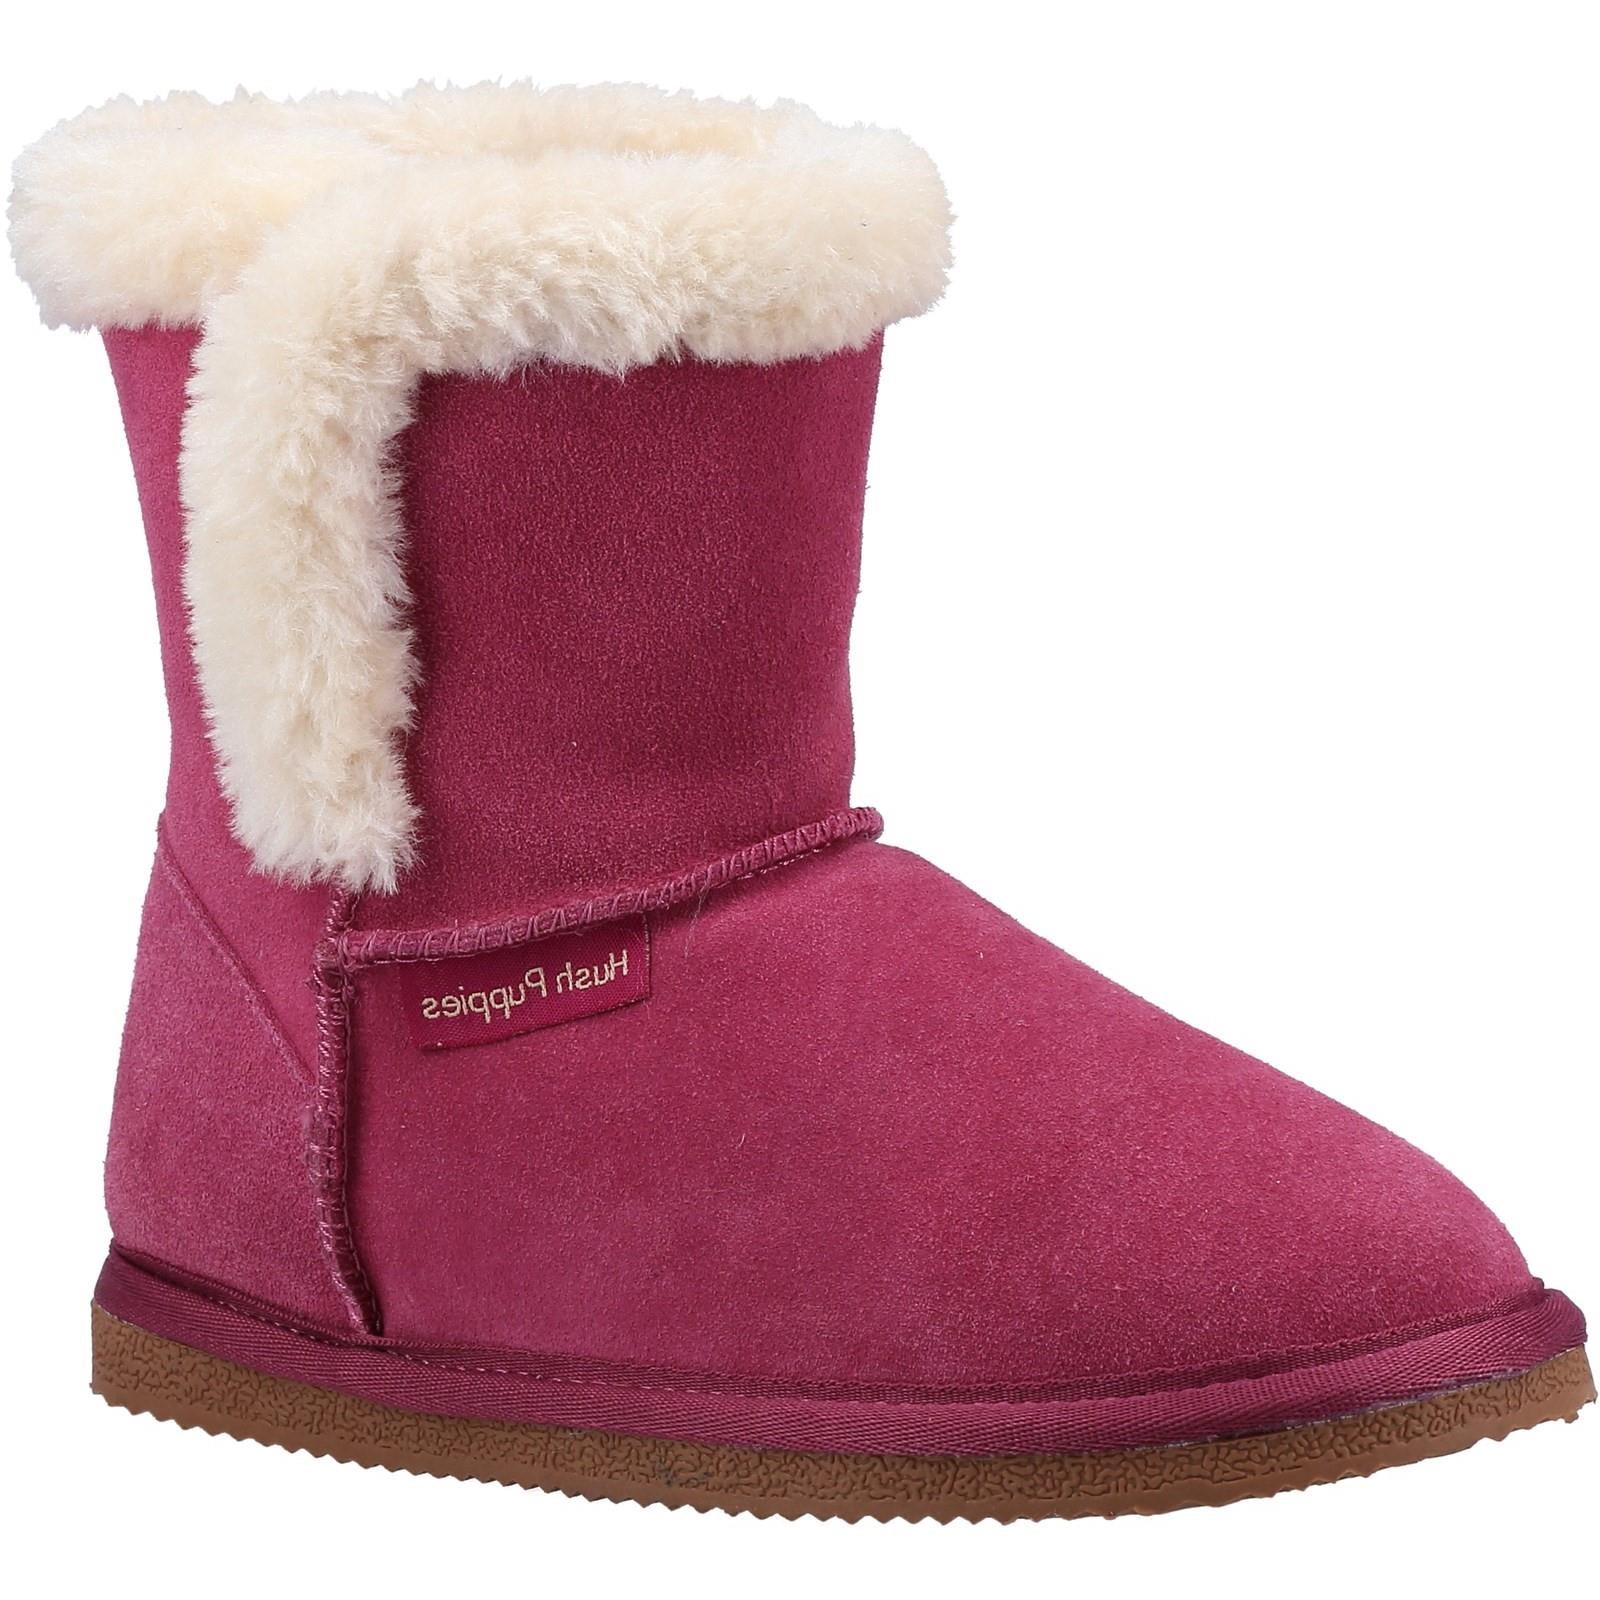 Hush Puppies Ashlynn rose real suede classic boot style slipper